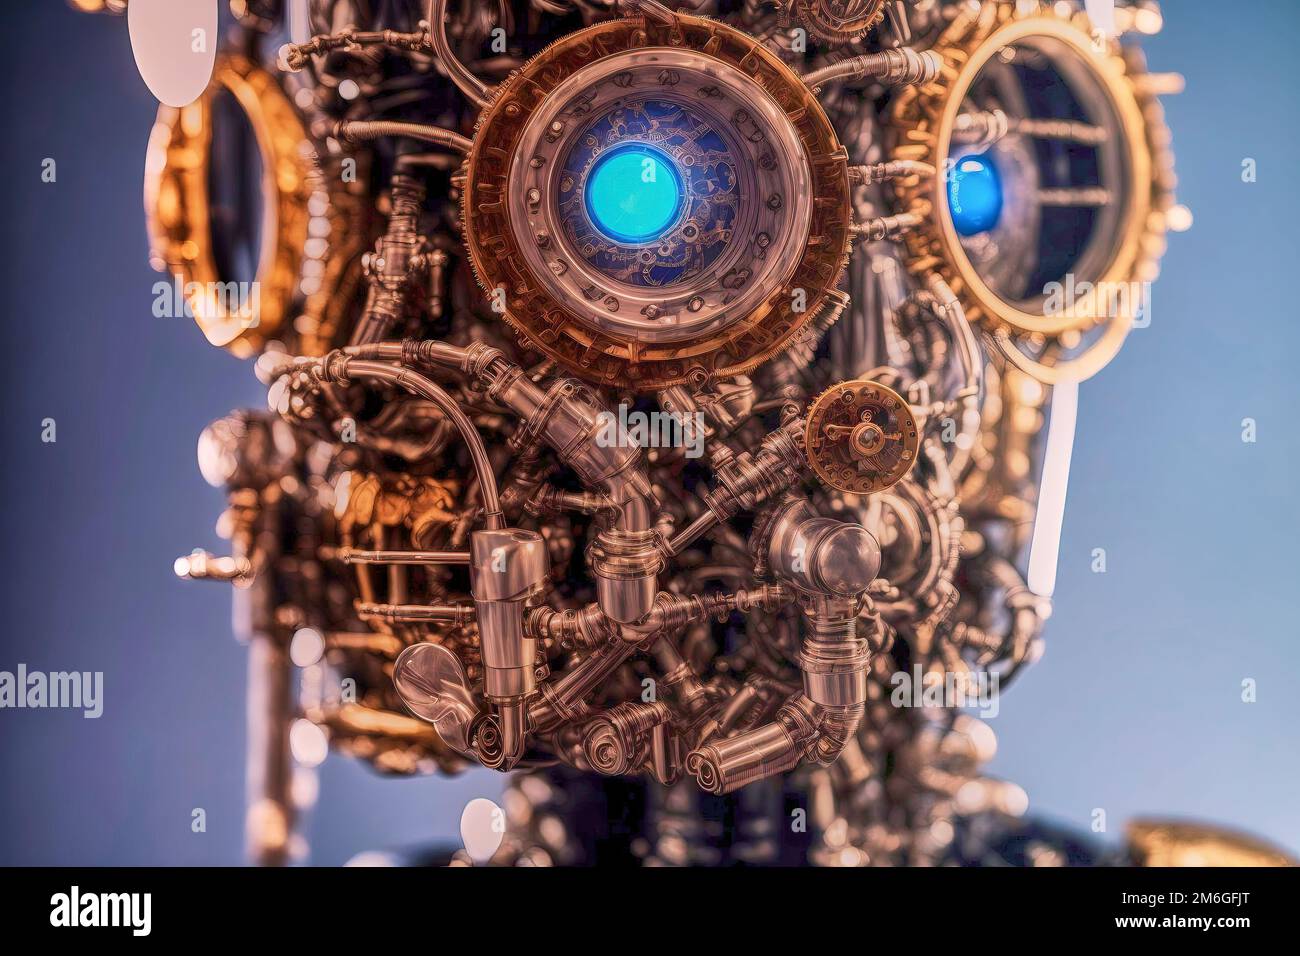 Close-up view of the head of a cyborg with small gears, valves and pipes and a large lens as an eye, made with generative AI Stock Photo